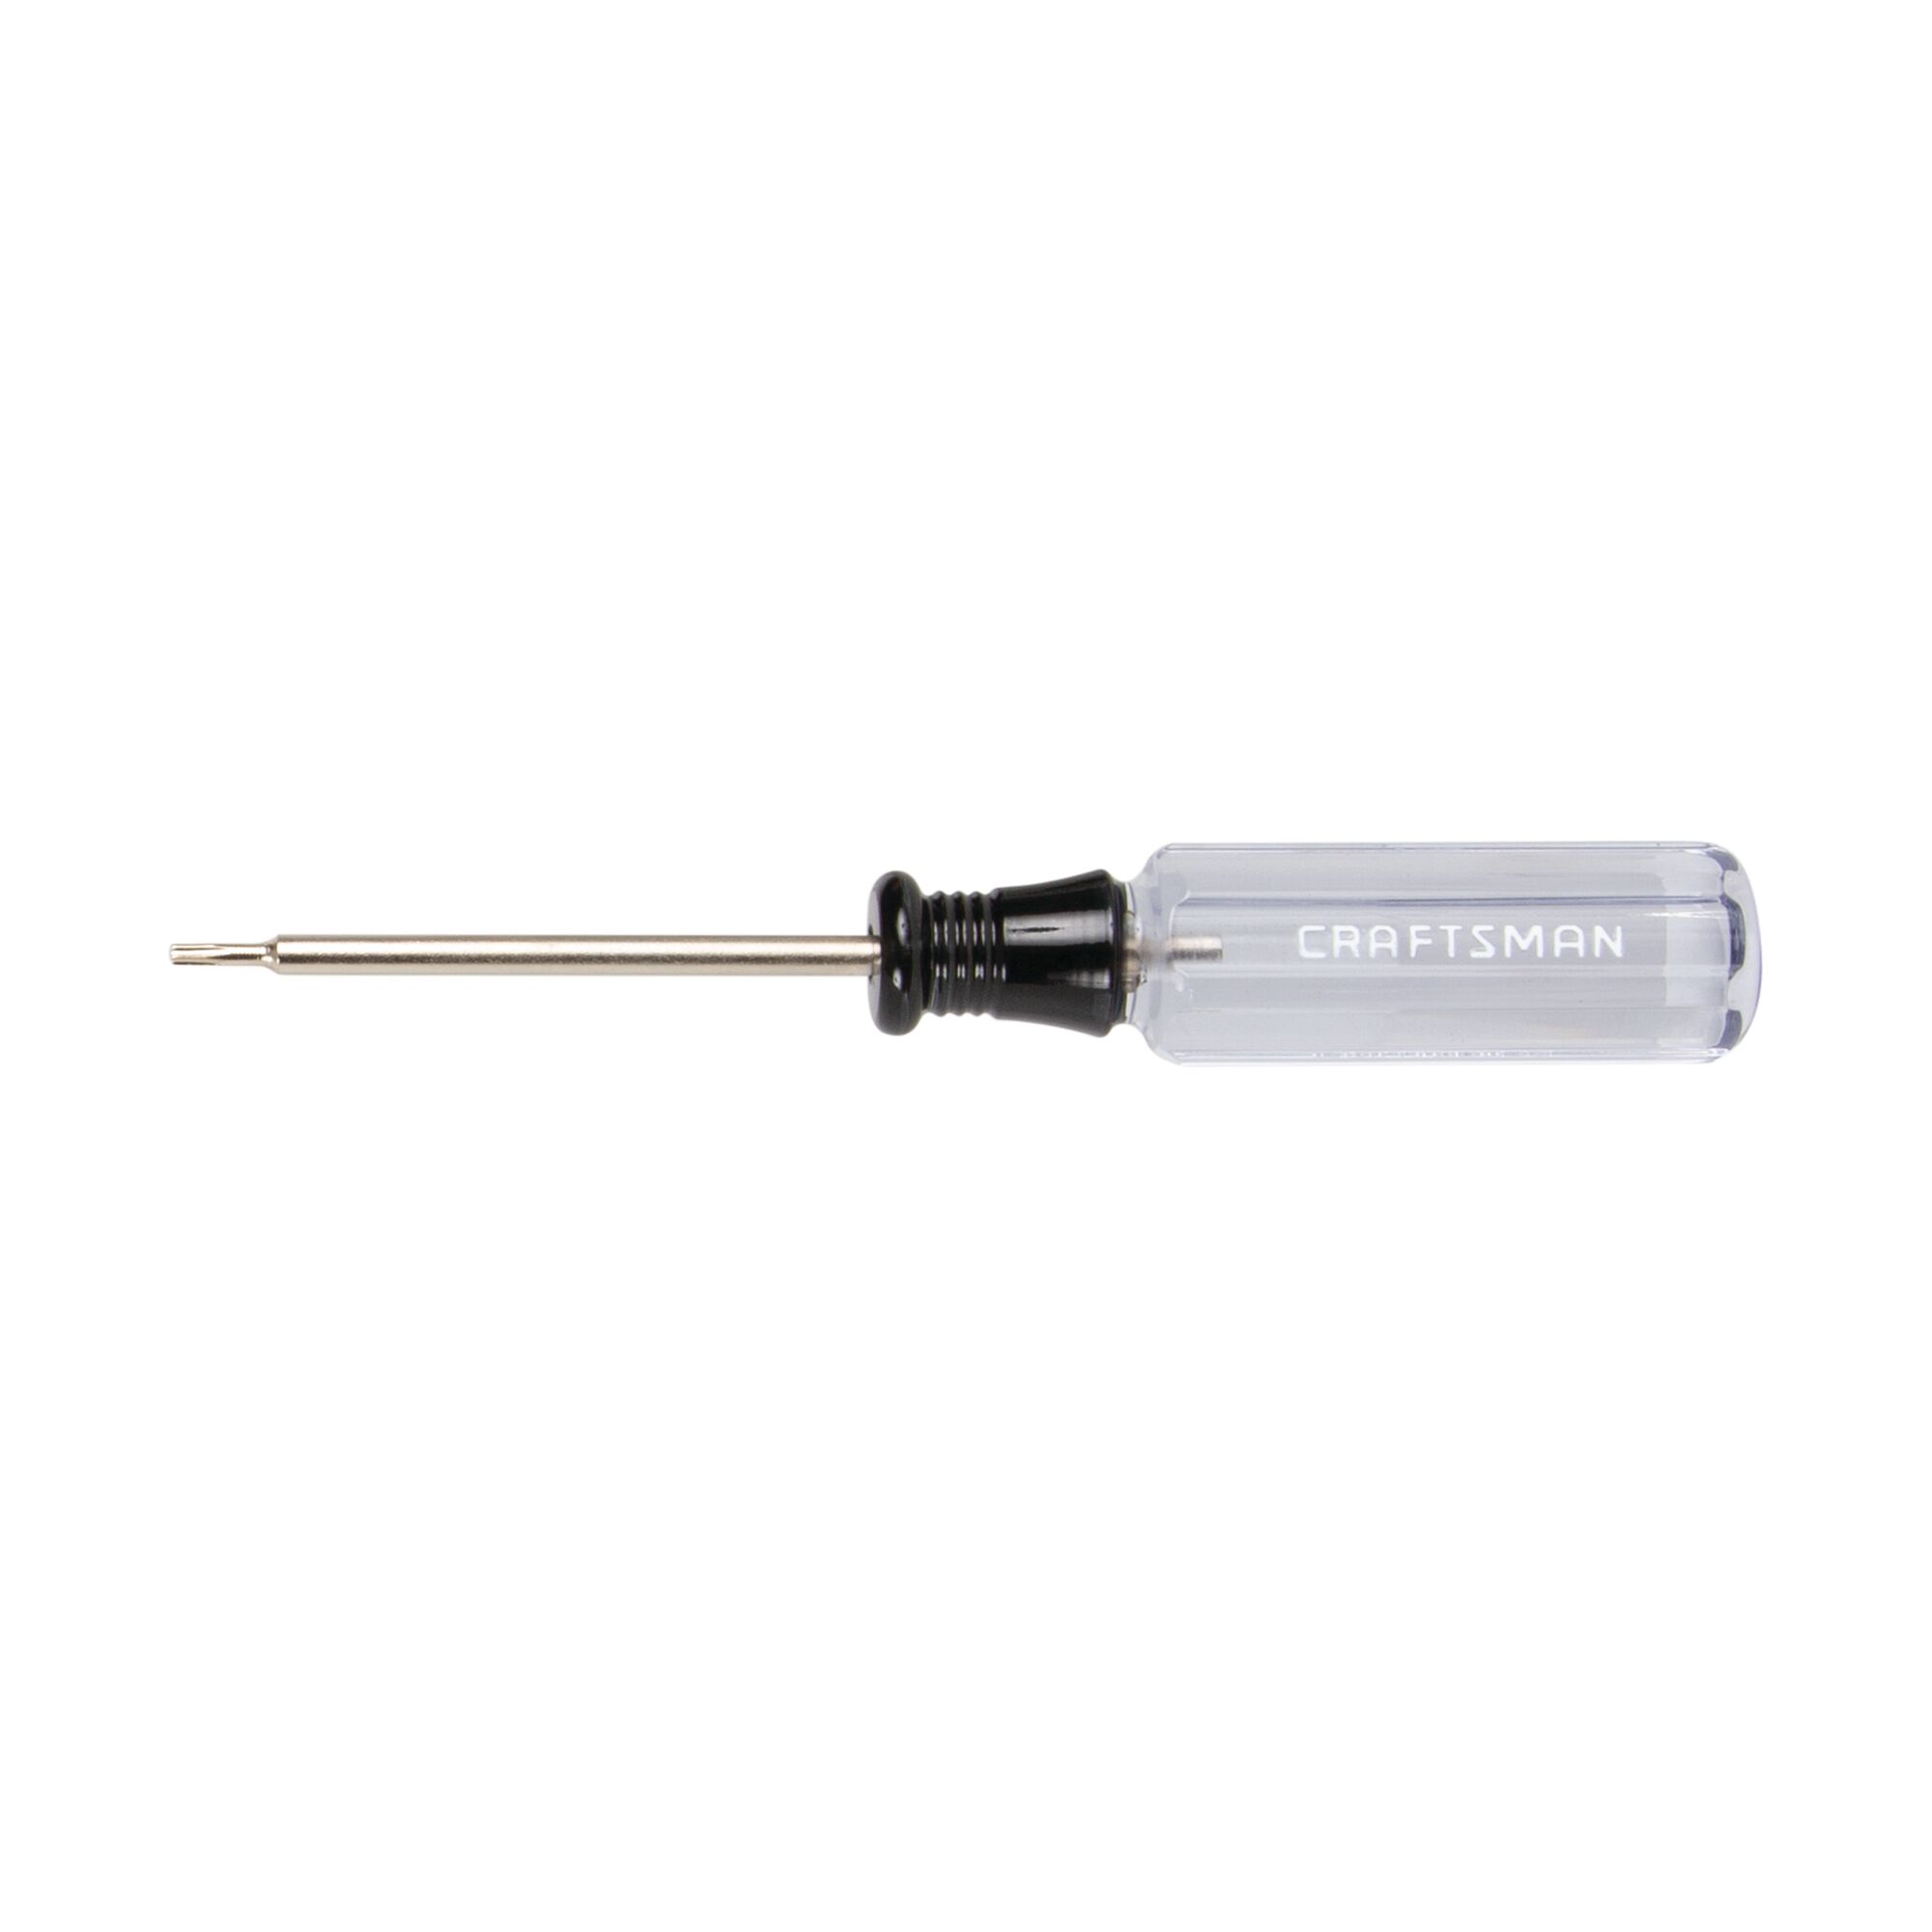 T 6 by 2 inch Acetate ScrewDriver.